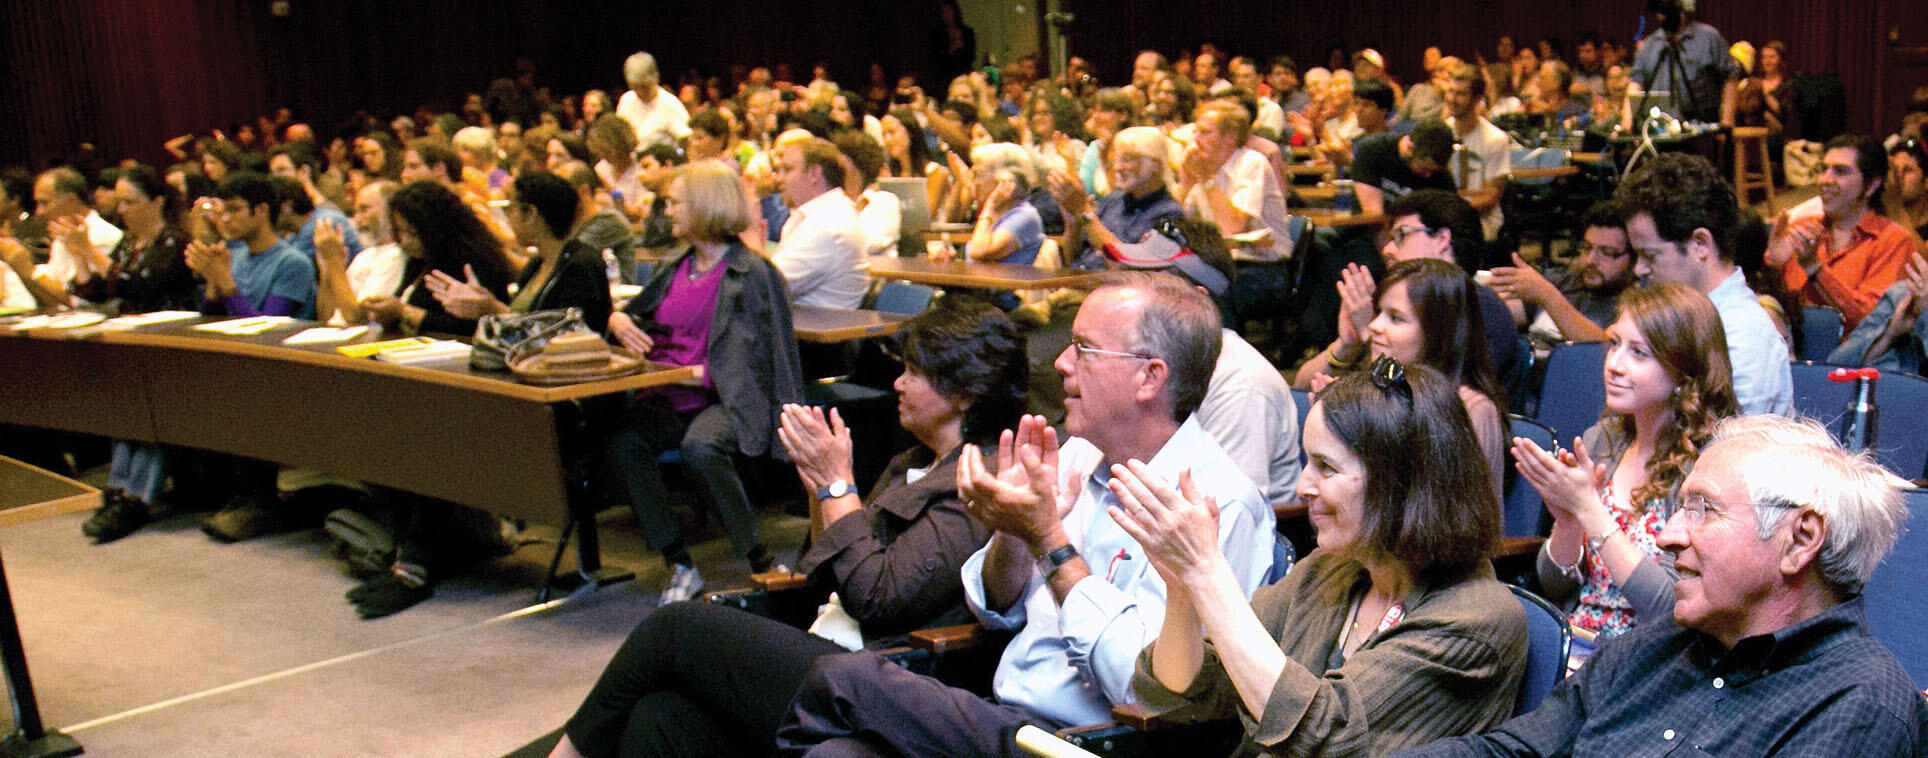 An enthusiastic ovation from the audience in response to Ricardo Lagos and Robert Reich on inequality. (Photo by Jim Block.)